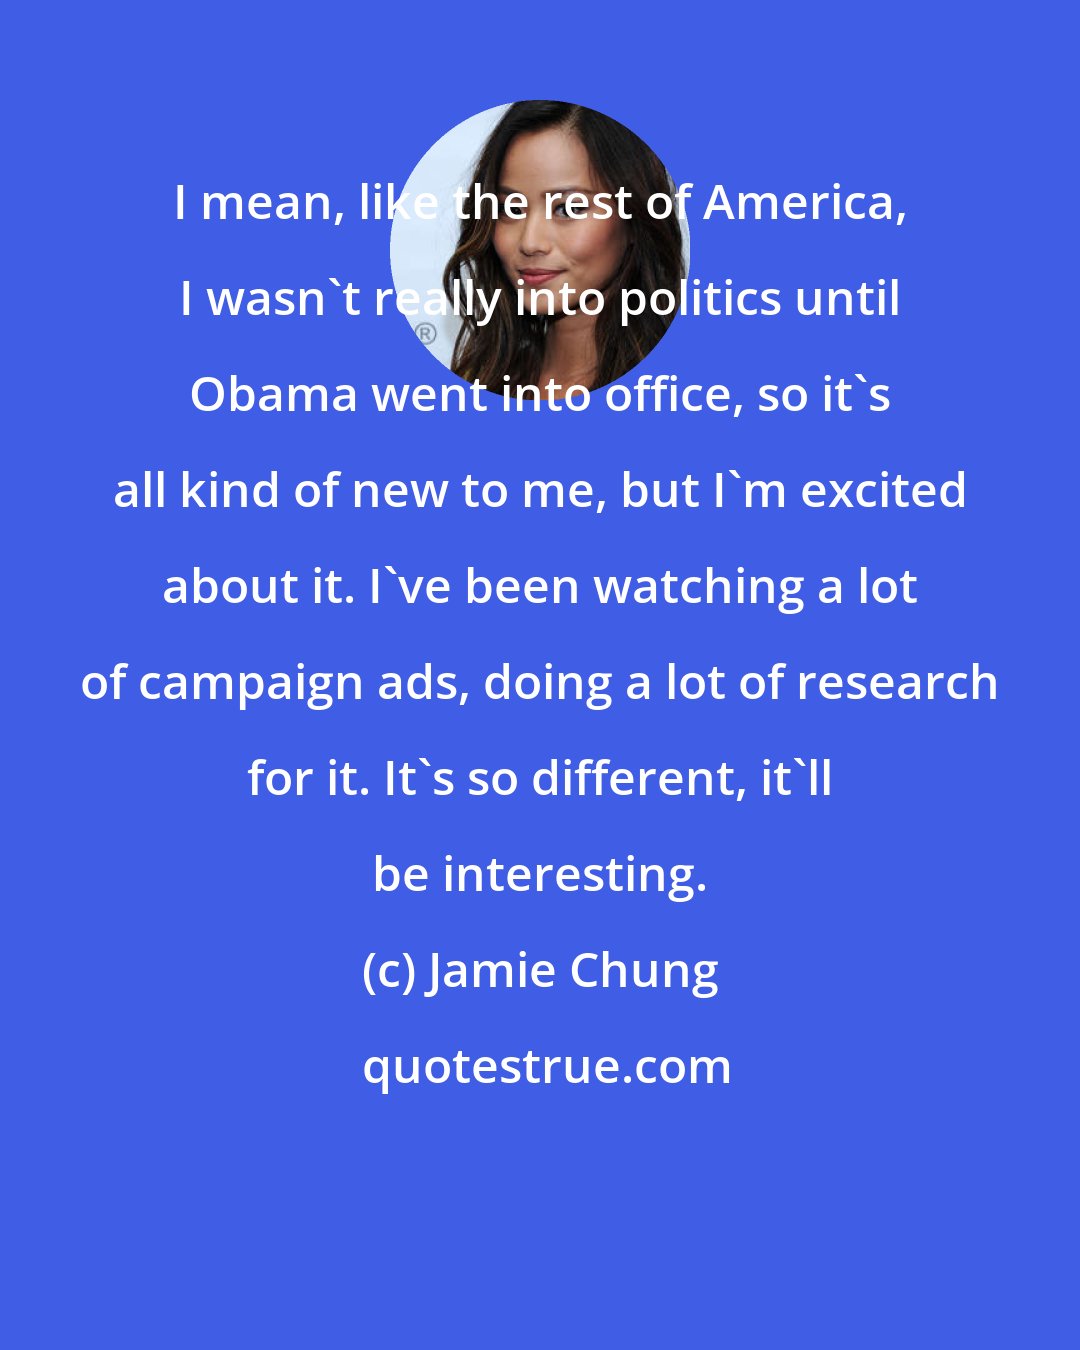 Jamie Chung: I mean, like the rest of America, I wasn't really into politics until Obama went into office, so it's all kind of new to me, but I'm excited about it. I've been watching a lot of campaign ads, doing a lot of research for it. It's so different, it'll be interesting.